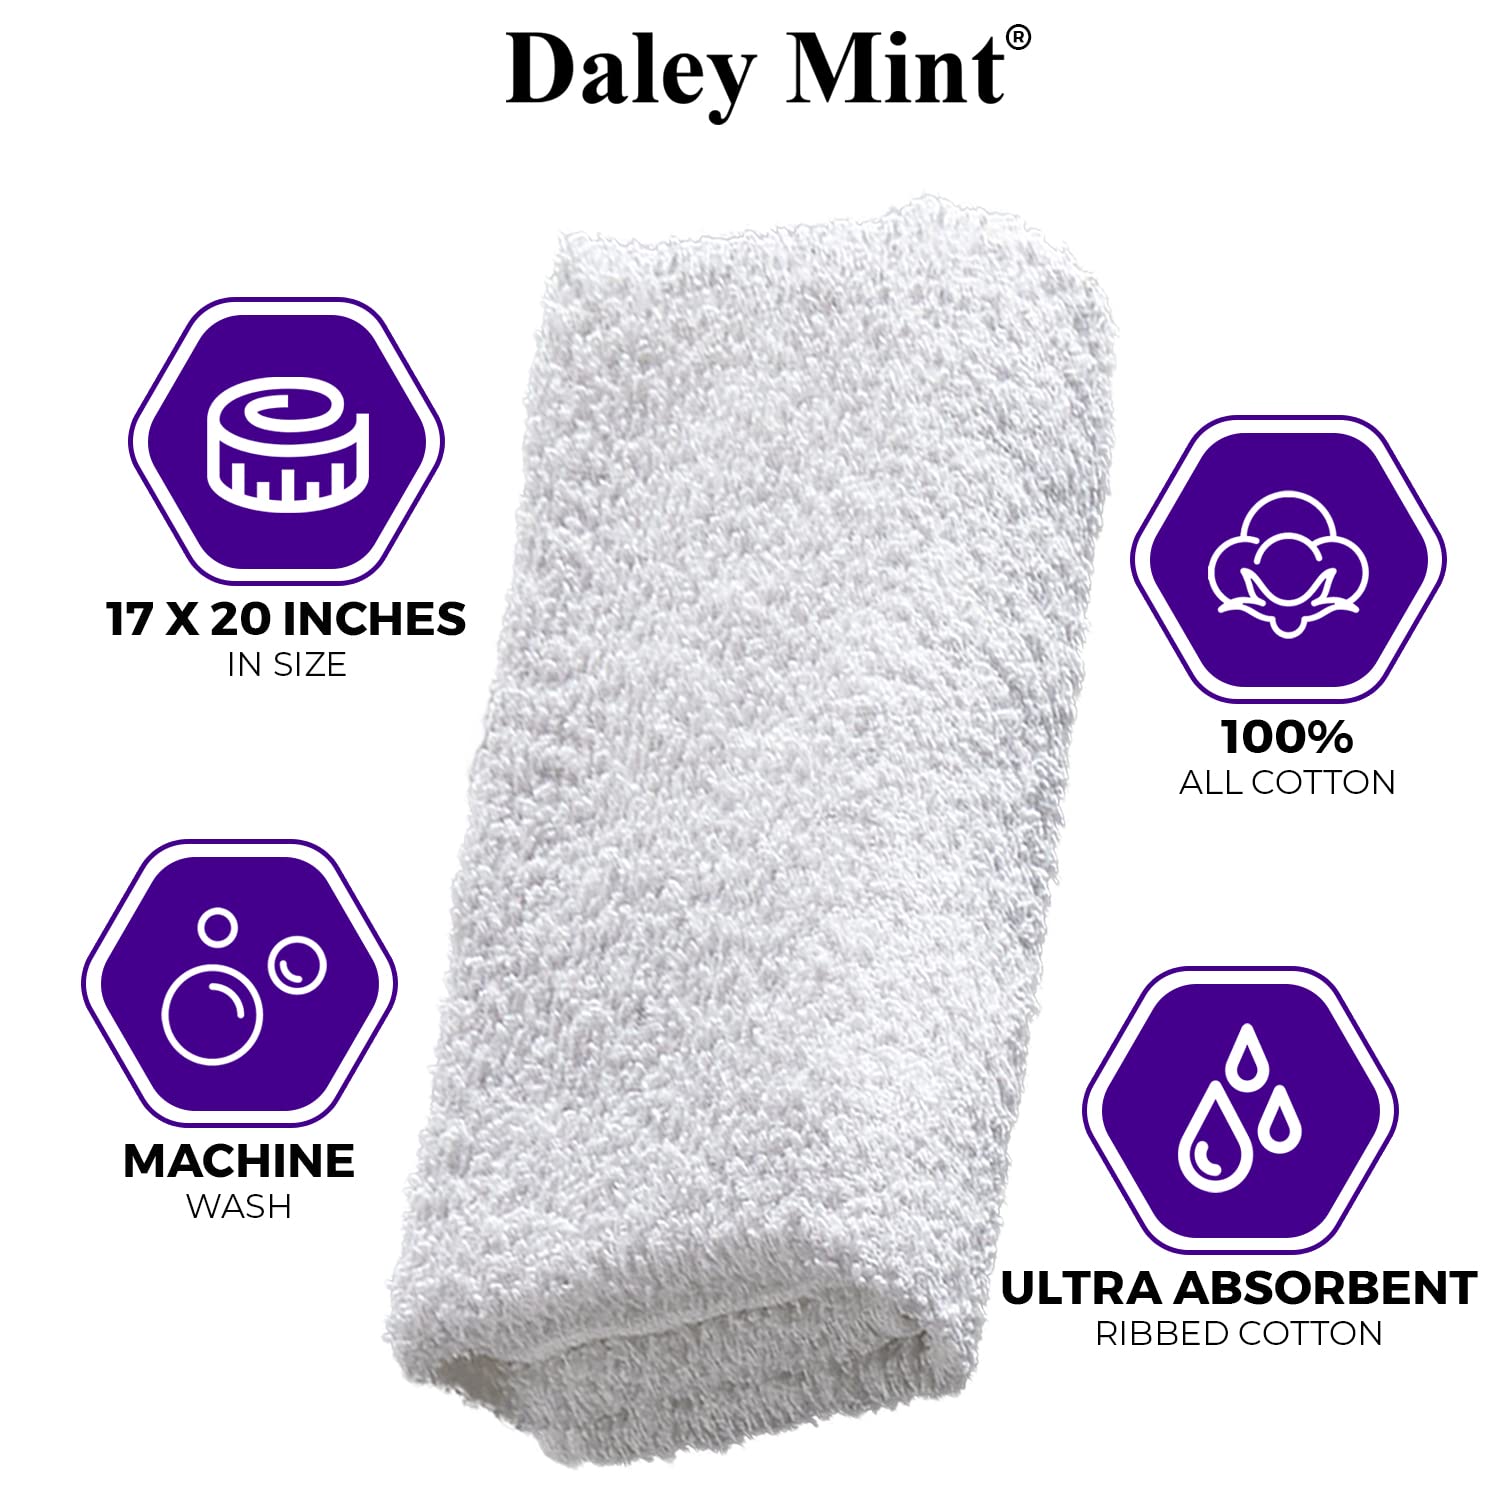 Daley Mint Towel + 409 Multi Surface Cleaners Bundle | 32oz Spray Bottle & 64oz Refill Jug | All Purpose House Cleaner for Kitchen, Bathroom, Homes